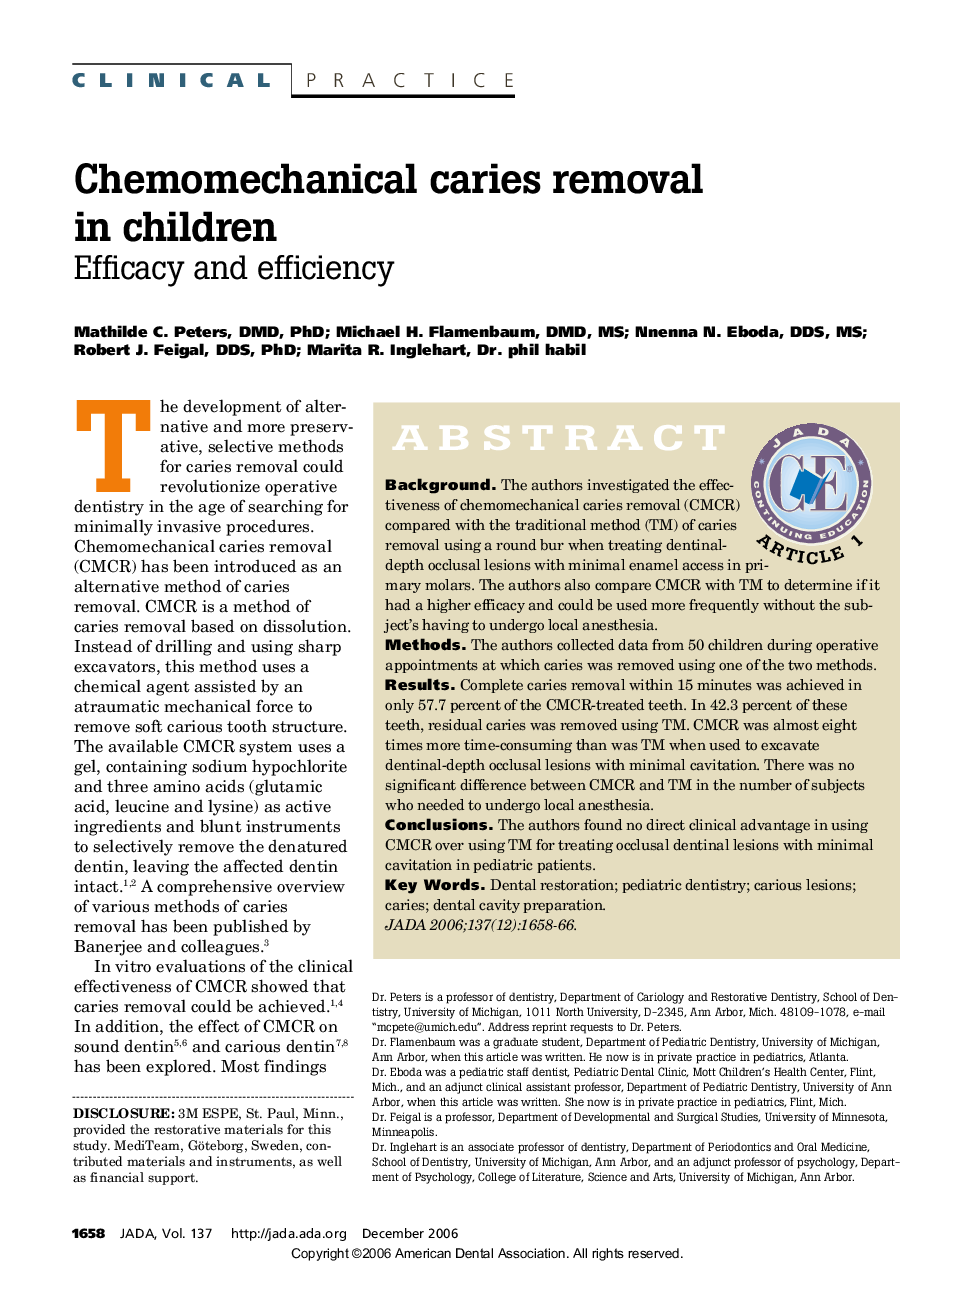 Chemomechanical caries removal in children